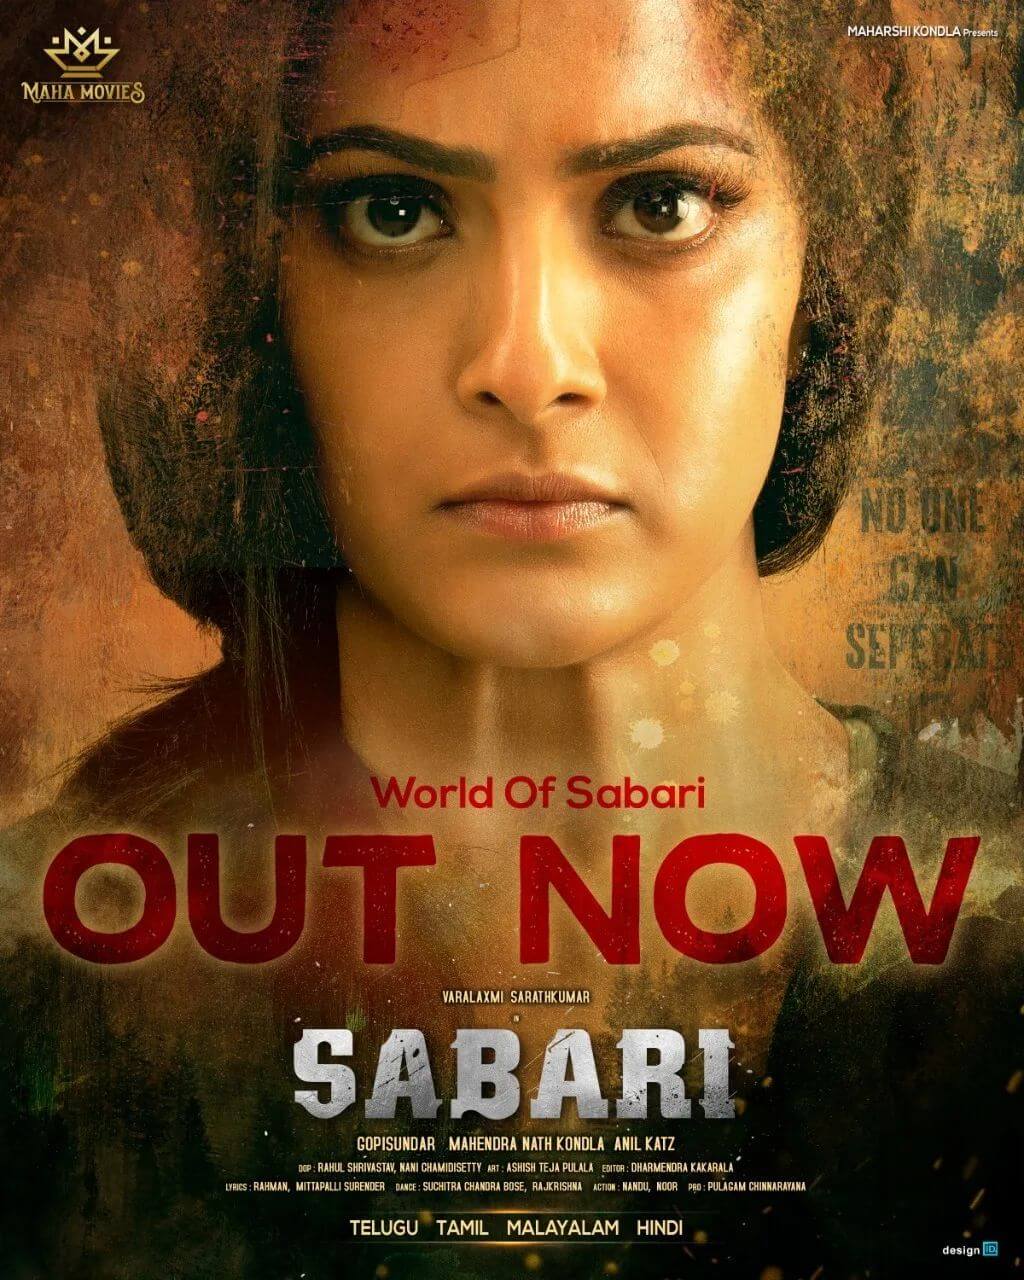 Sabari Movie (2023) Cast, Release Date, Story, Budget, Collection, Poster, Trailer, Review